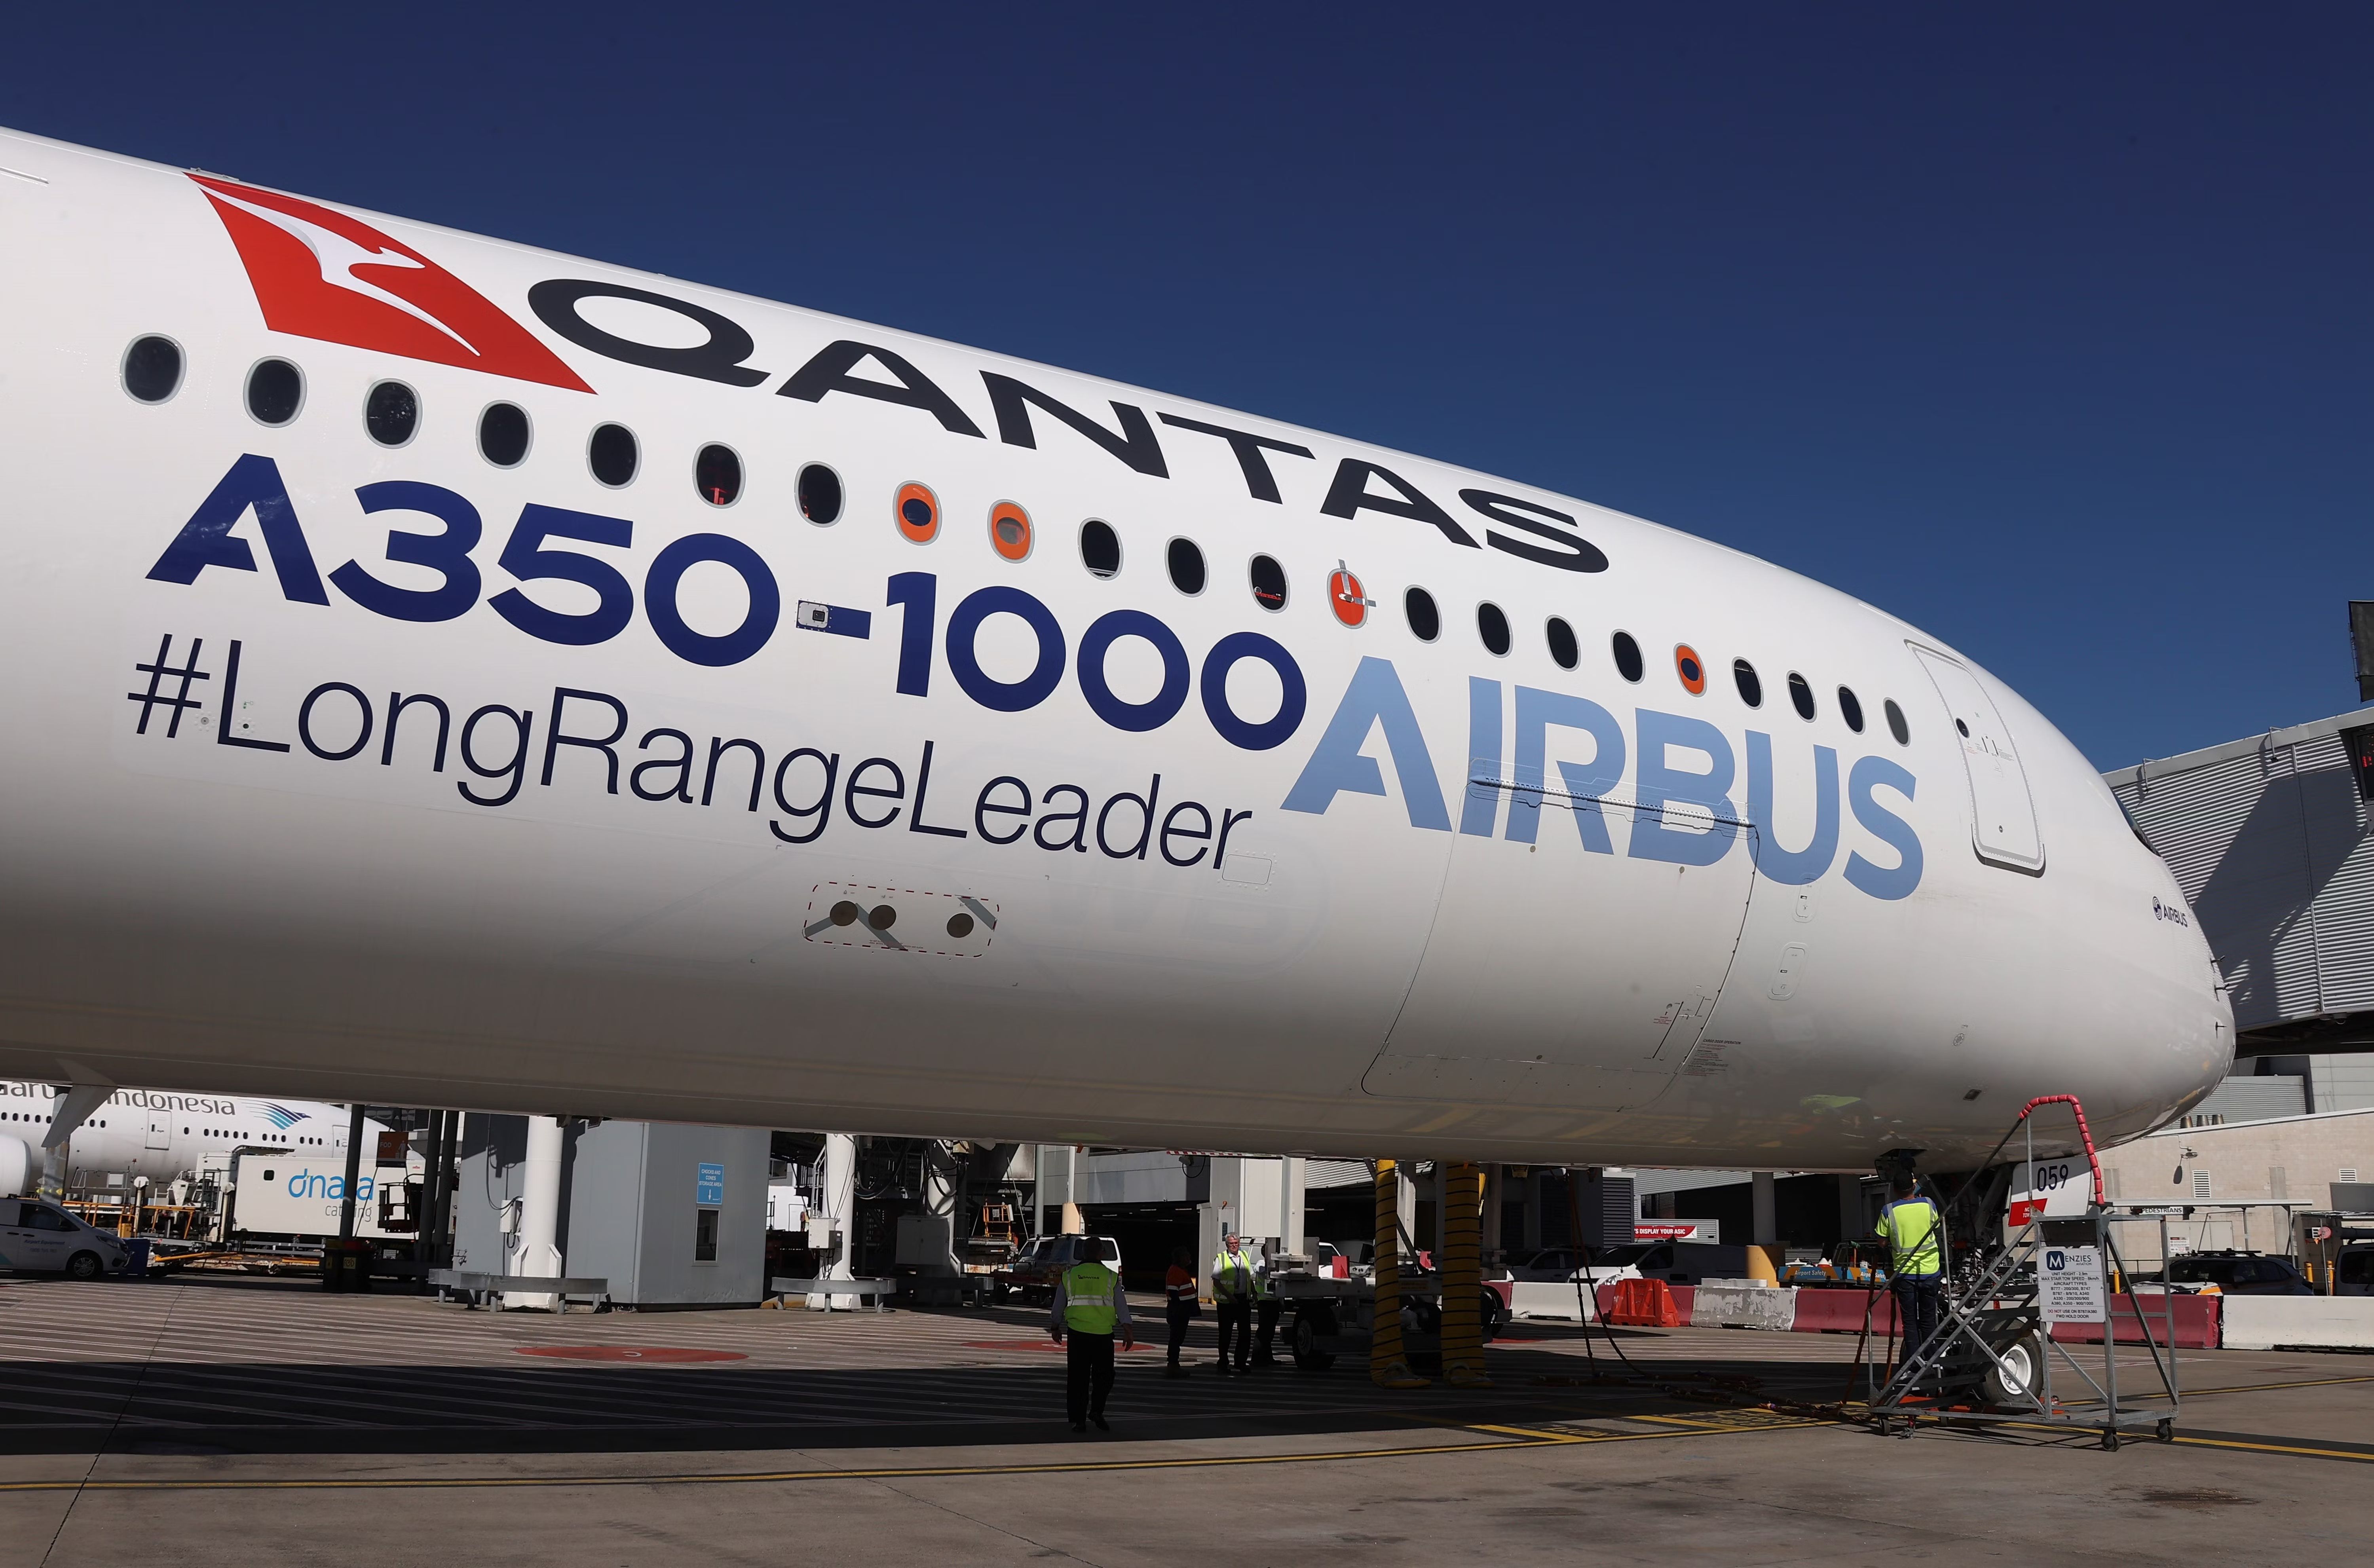 A Qantas A350-1000 parked on an airport apron.